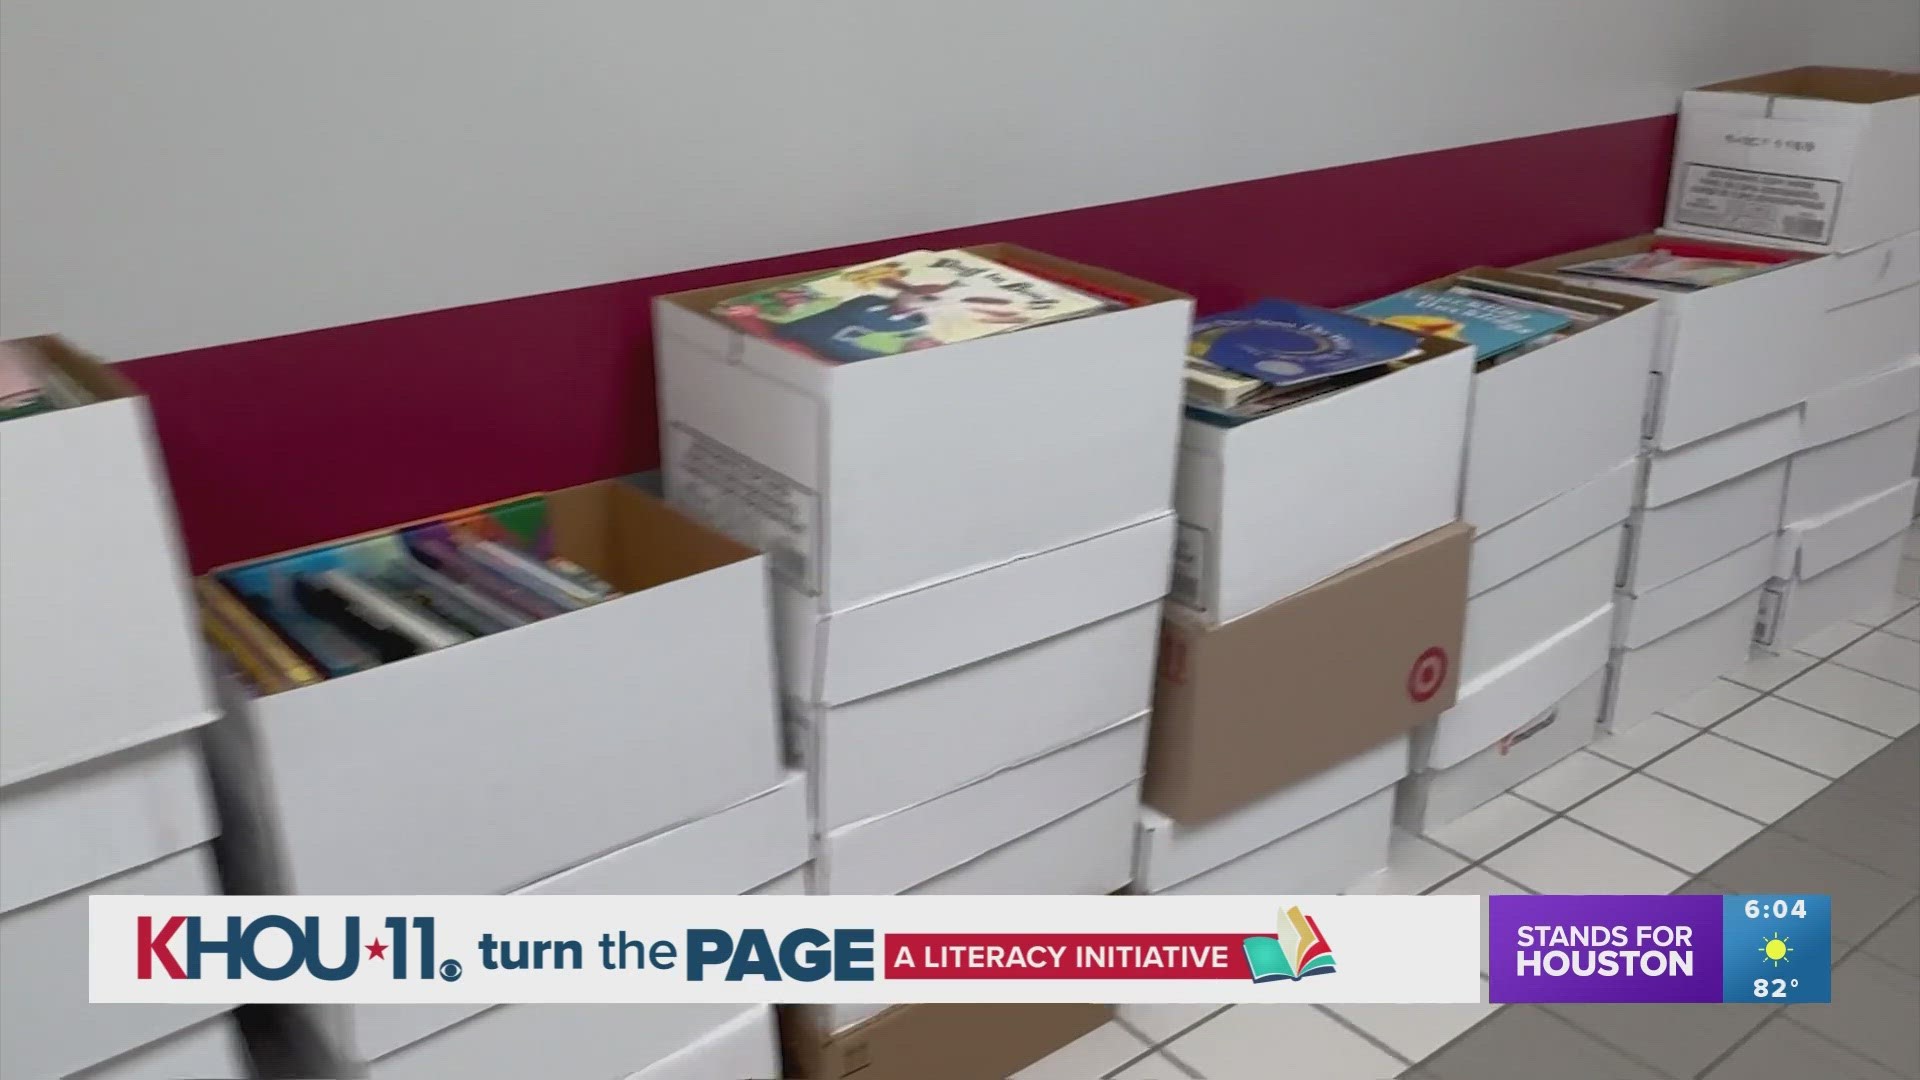 Magnolia Elementary donated dozens of boxes full of new and gently used books to help KHOU 11, your Education Station, provide 20,000 books to area kids.